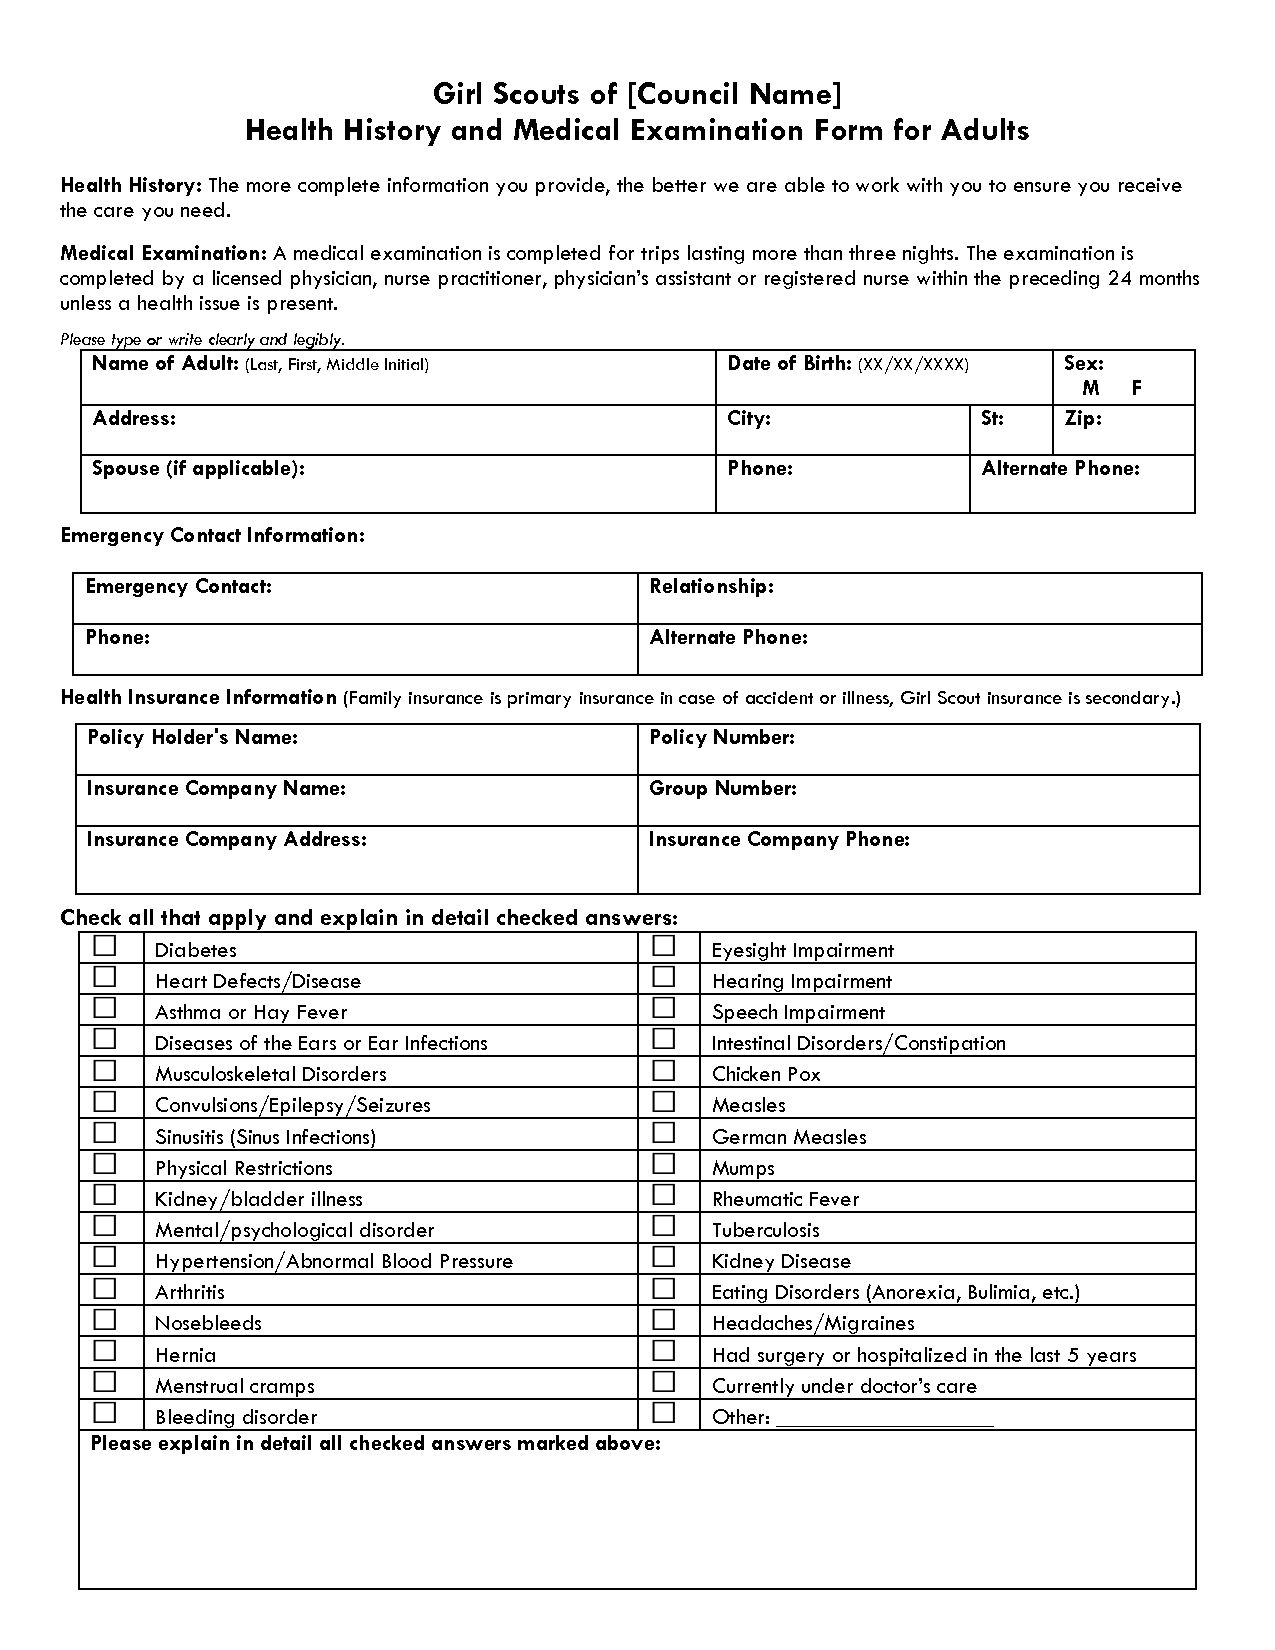 medical examination form Fill Online, Printable, Fillable, Blank 